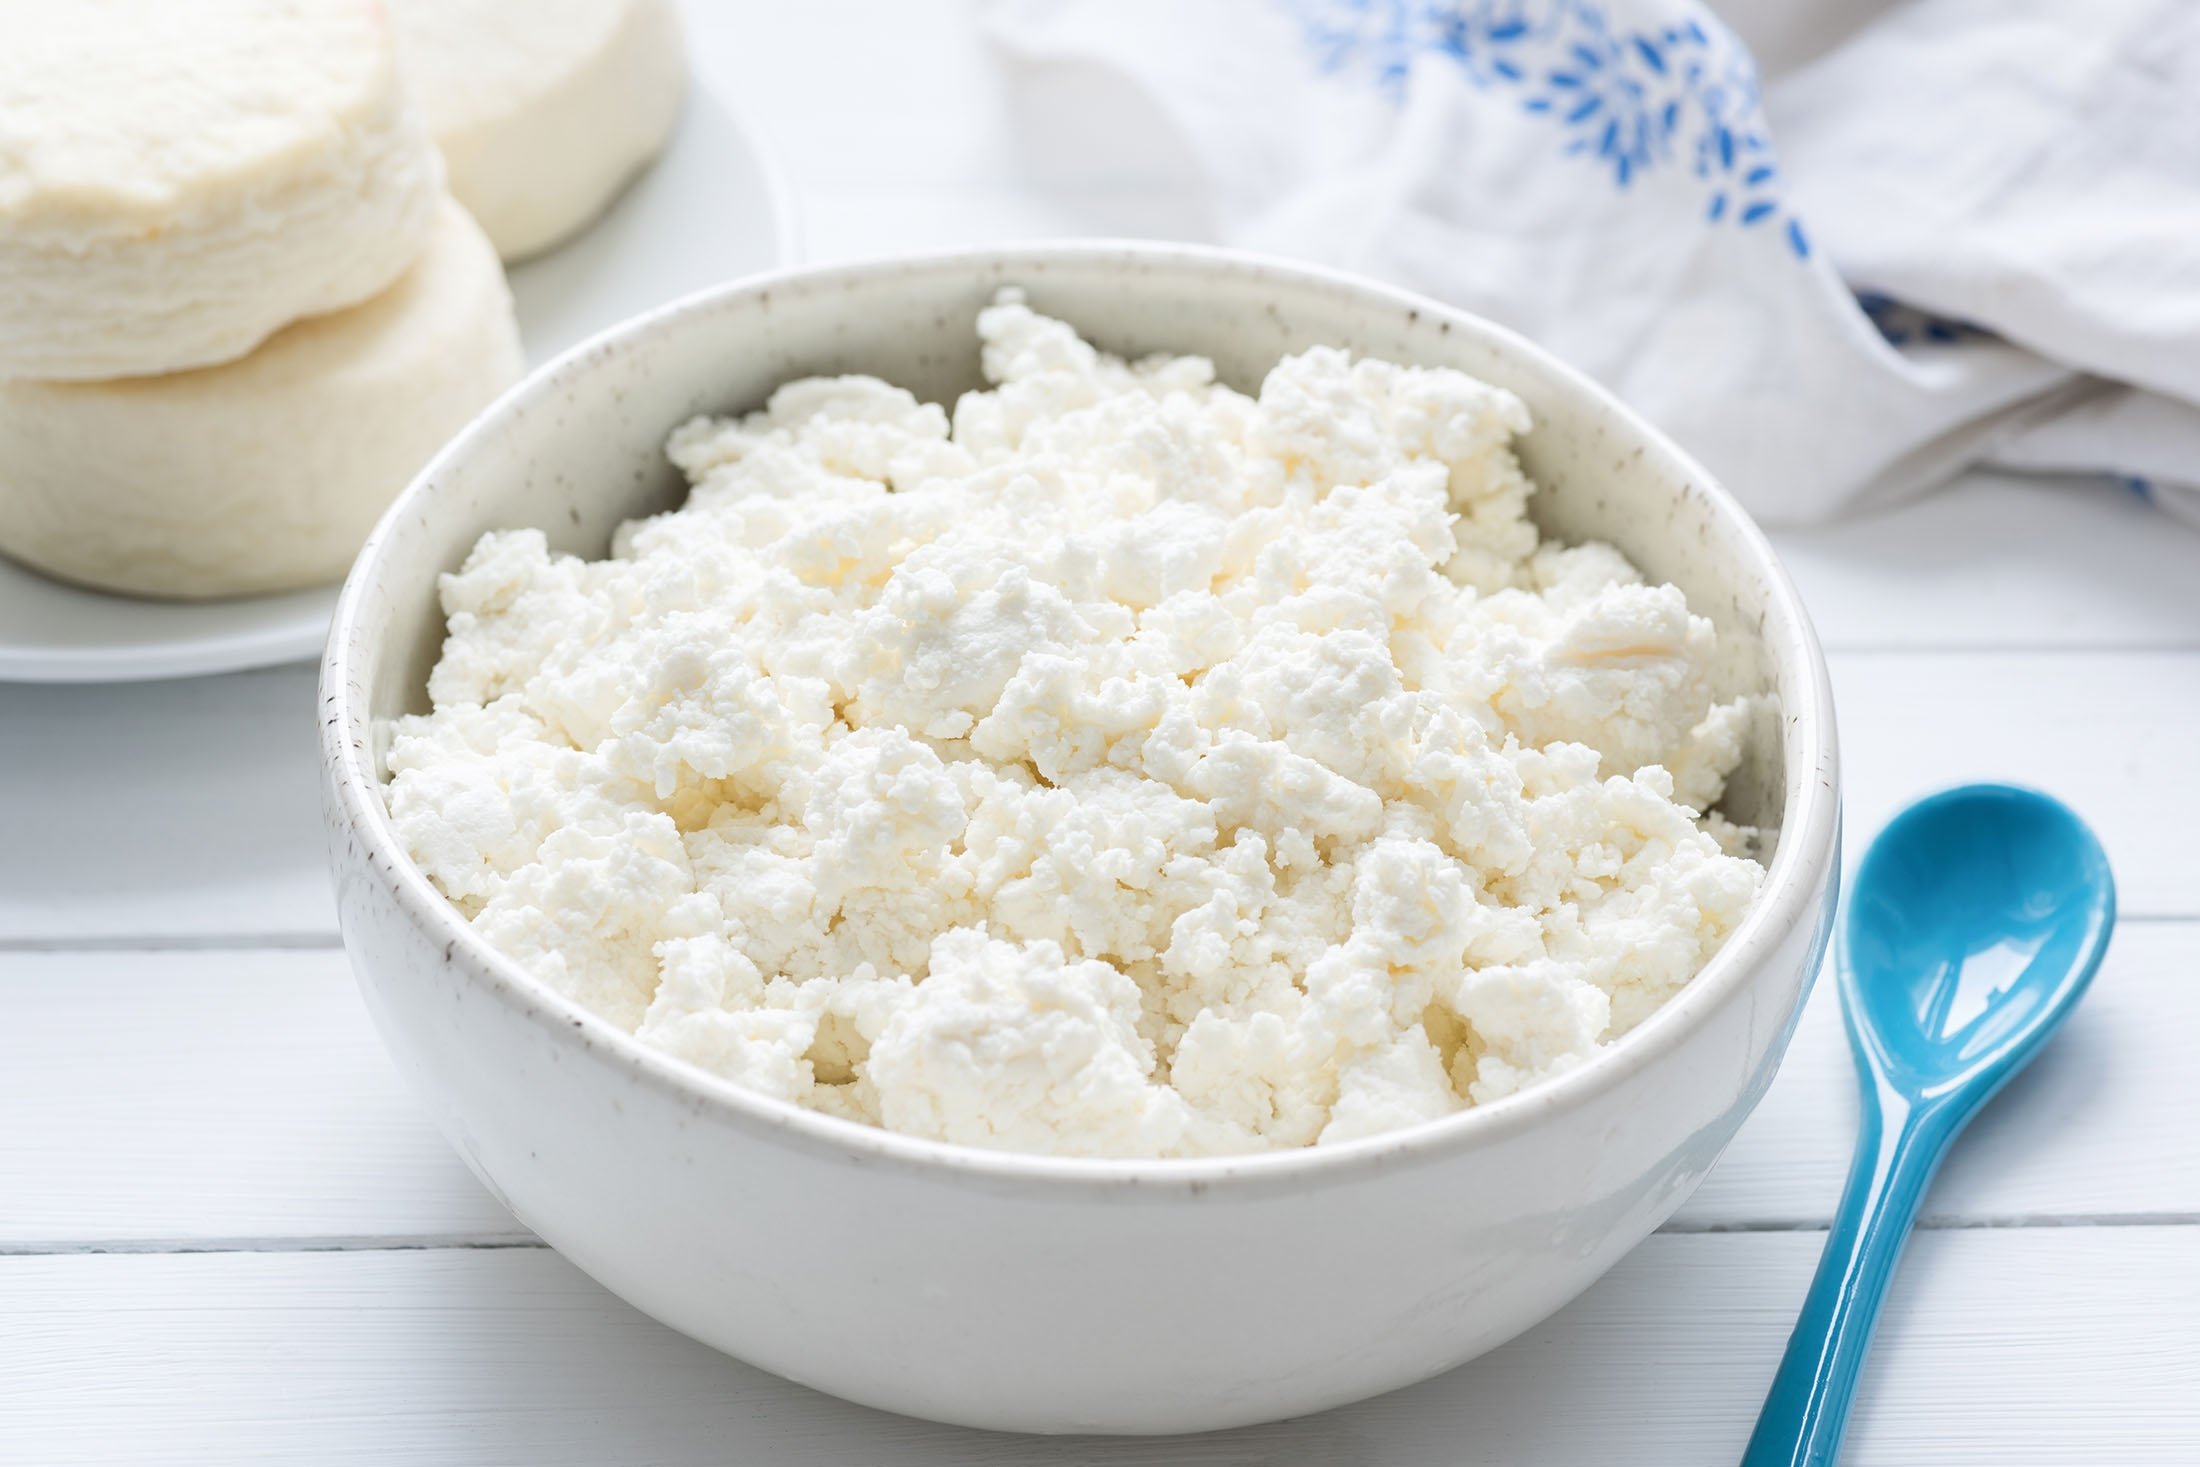 Curd cheese. (Shutterstock Photo)